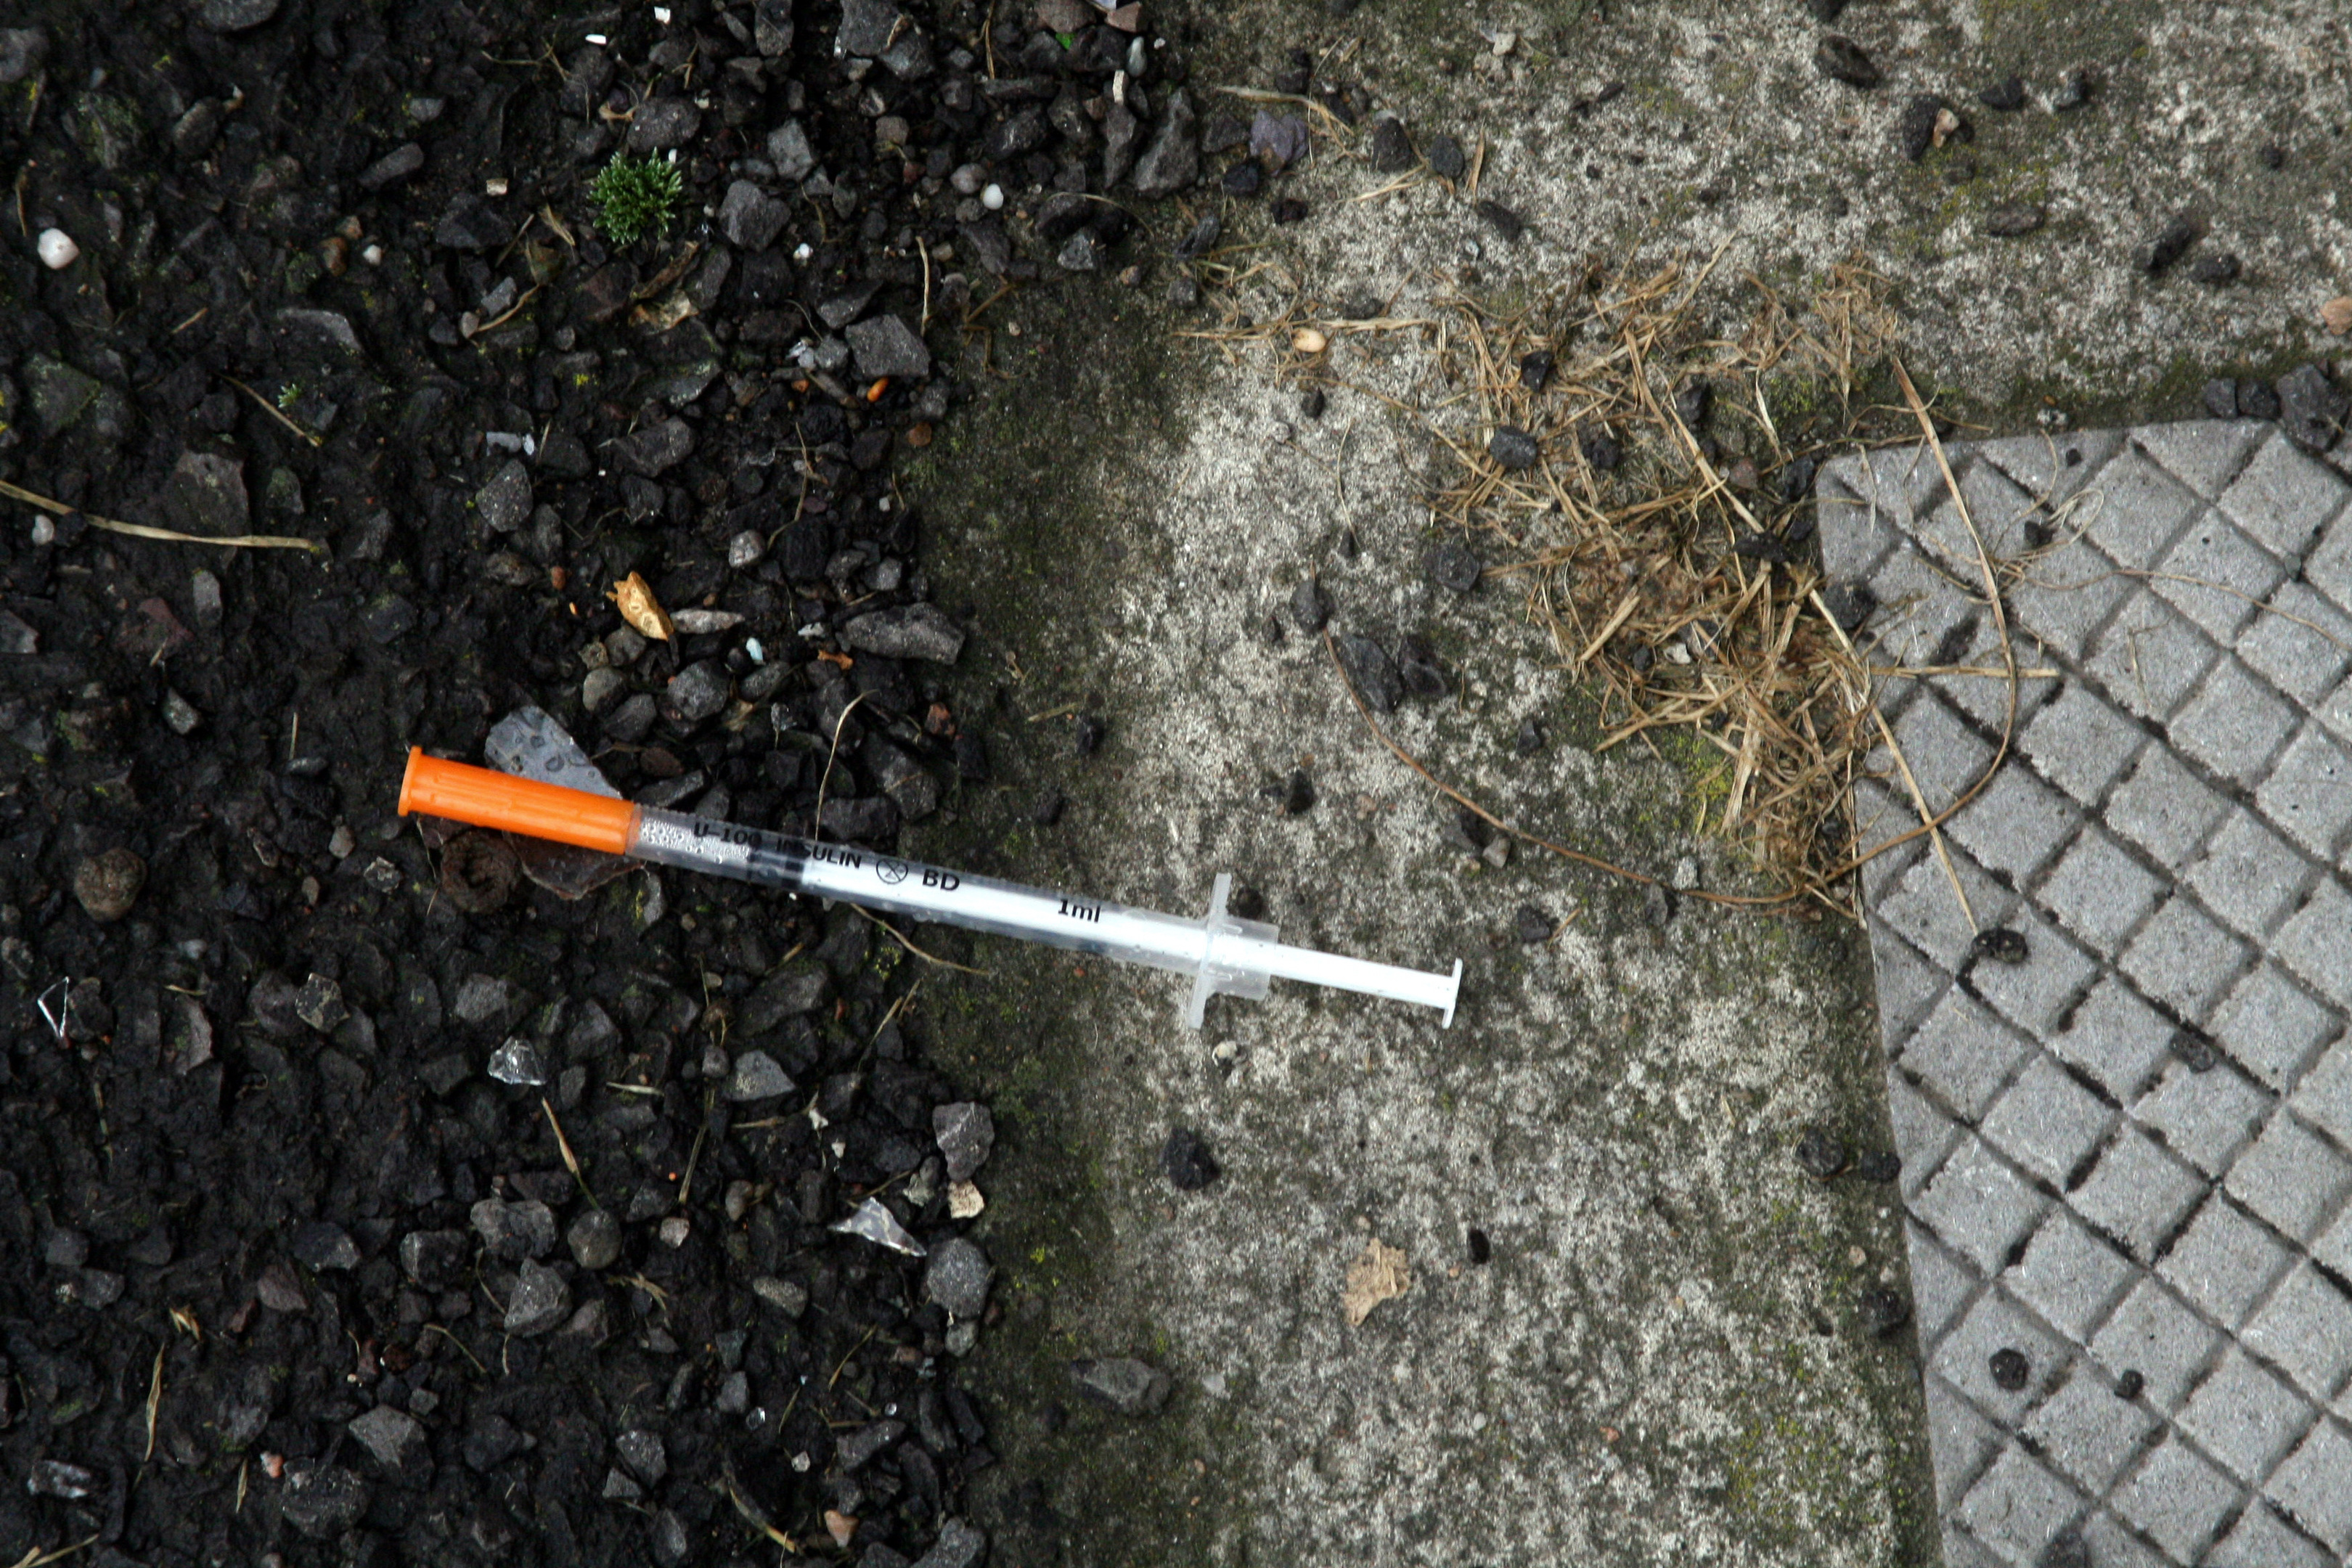 846 needles were uplifted by the council after being reported last year